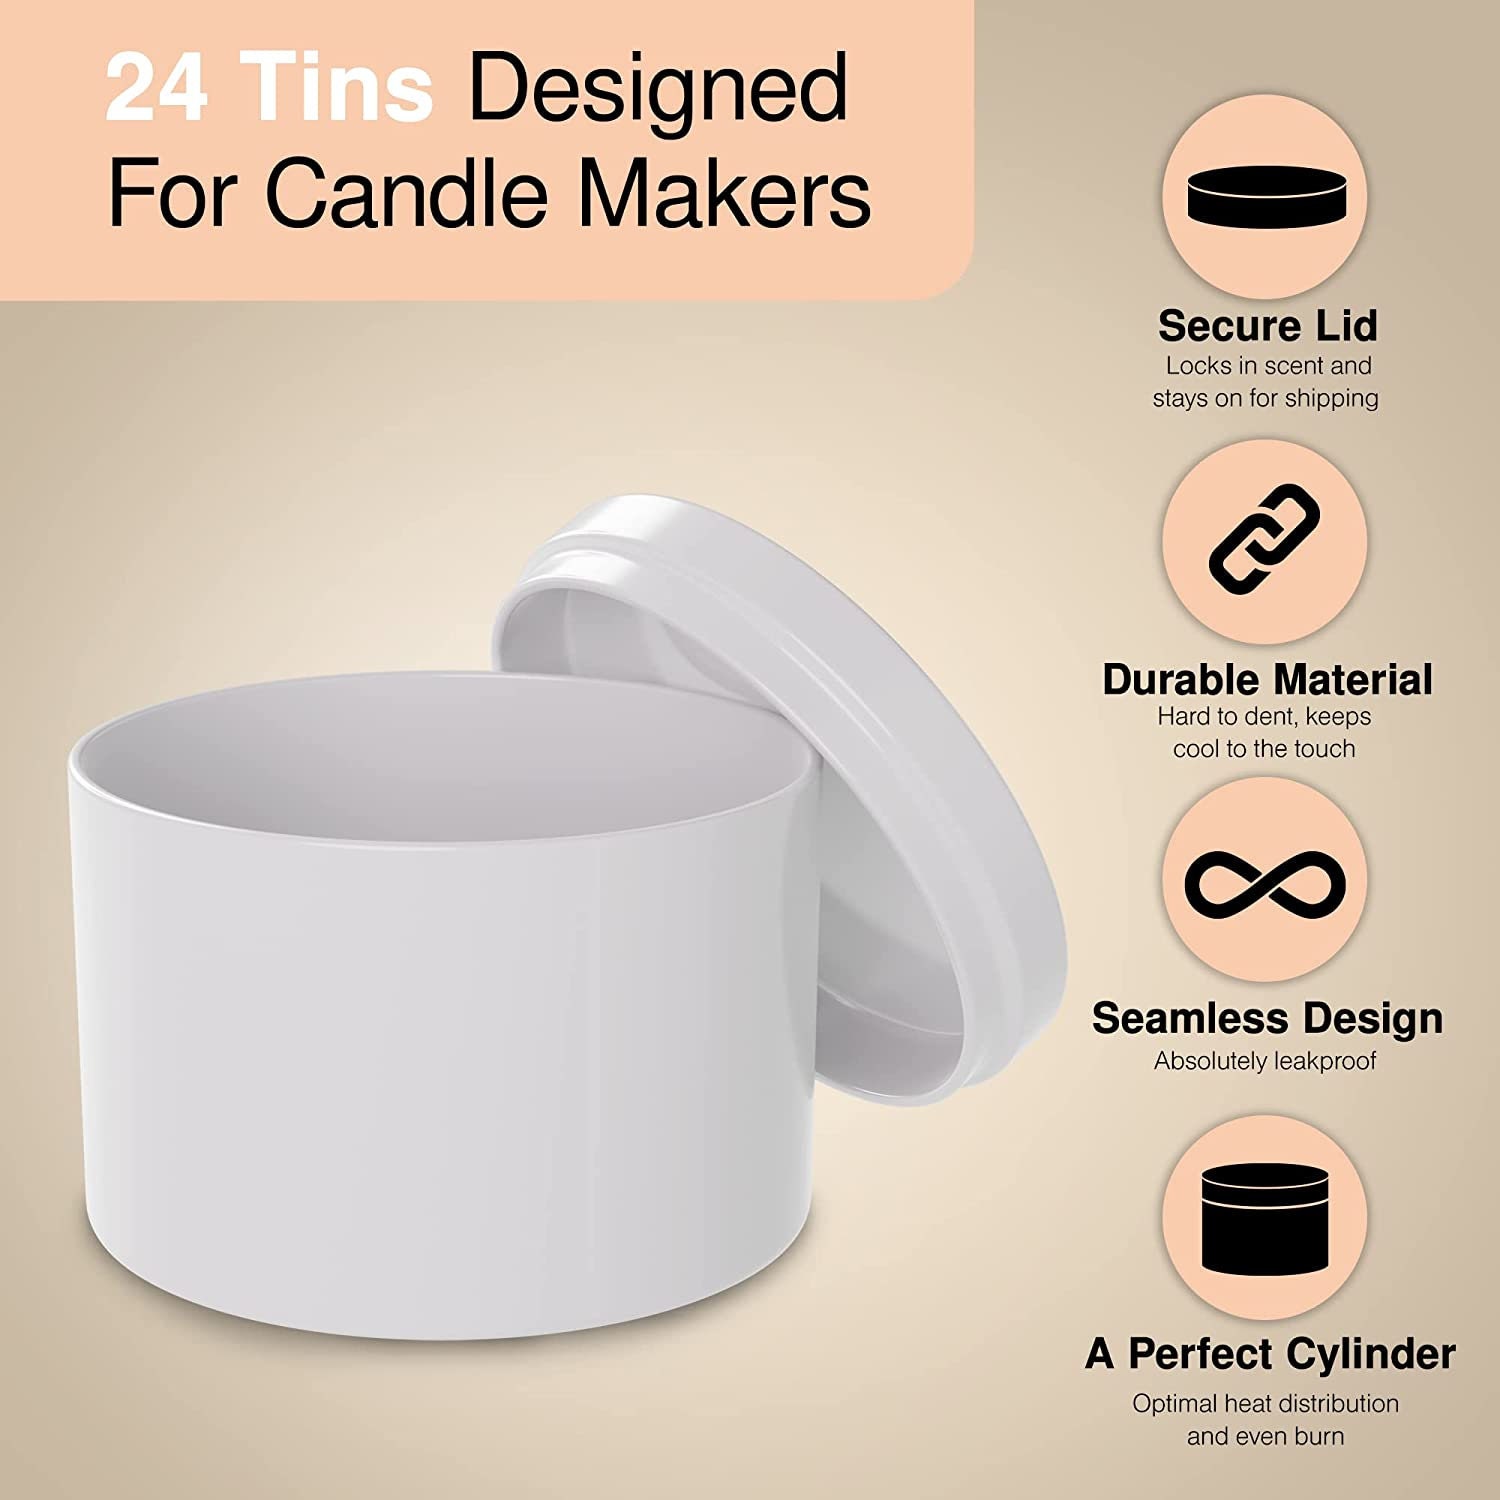 True Candle, 24x 8oz Candle tins, Edgeless Cylinder Design